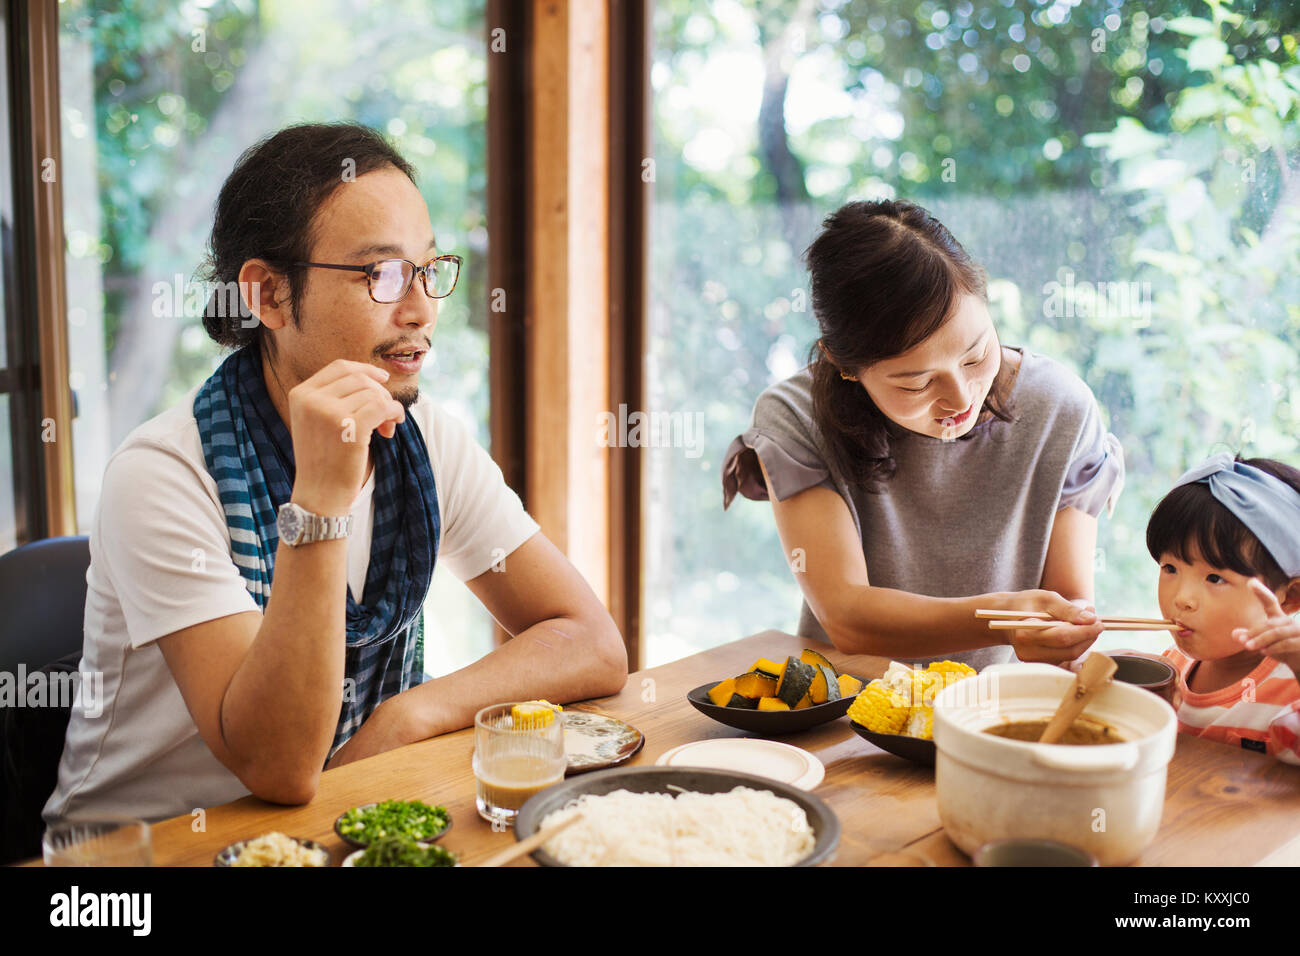 Man, woman and young girl sitting round a table with bowls of food, eating together. Stock Photo